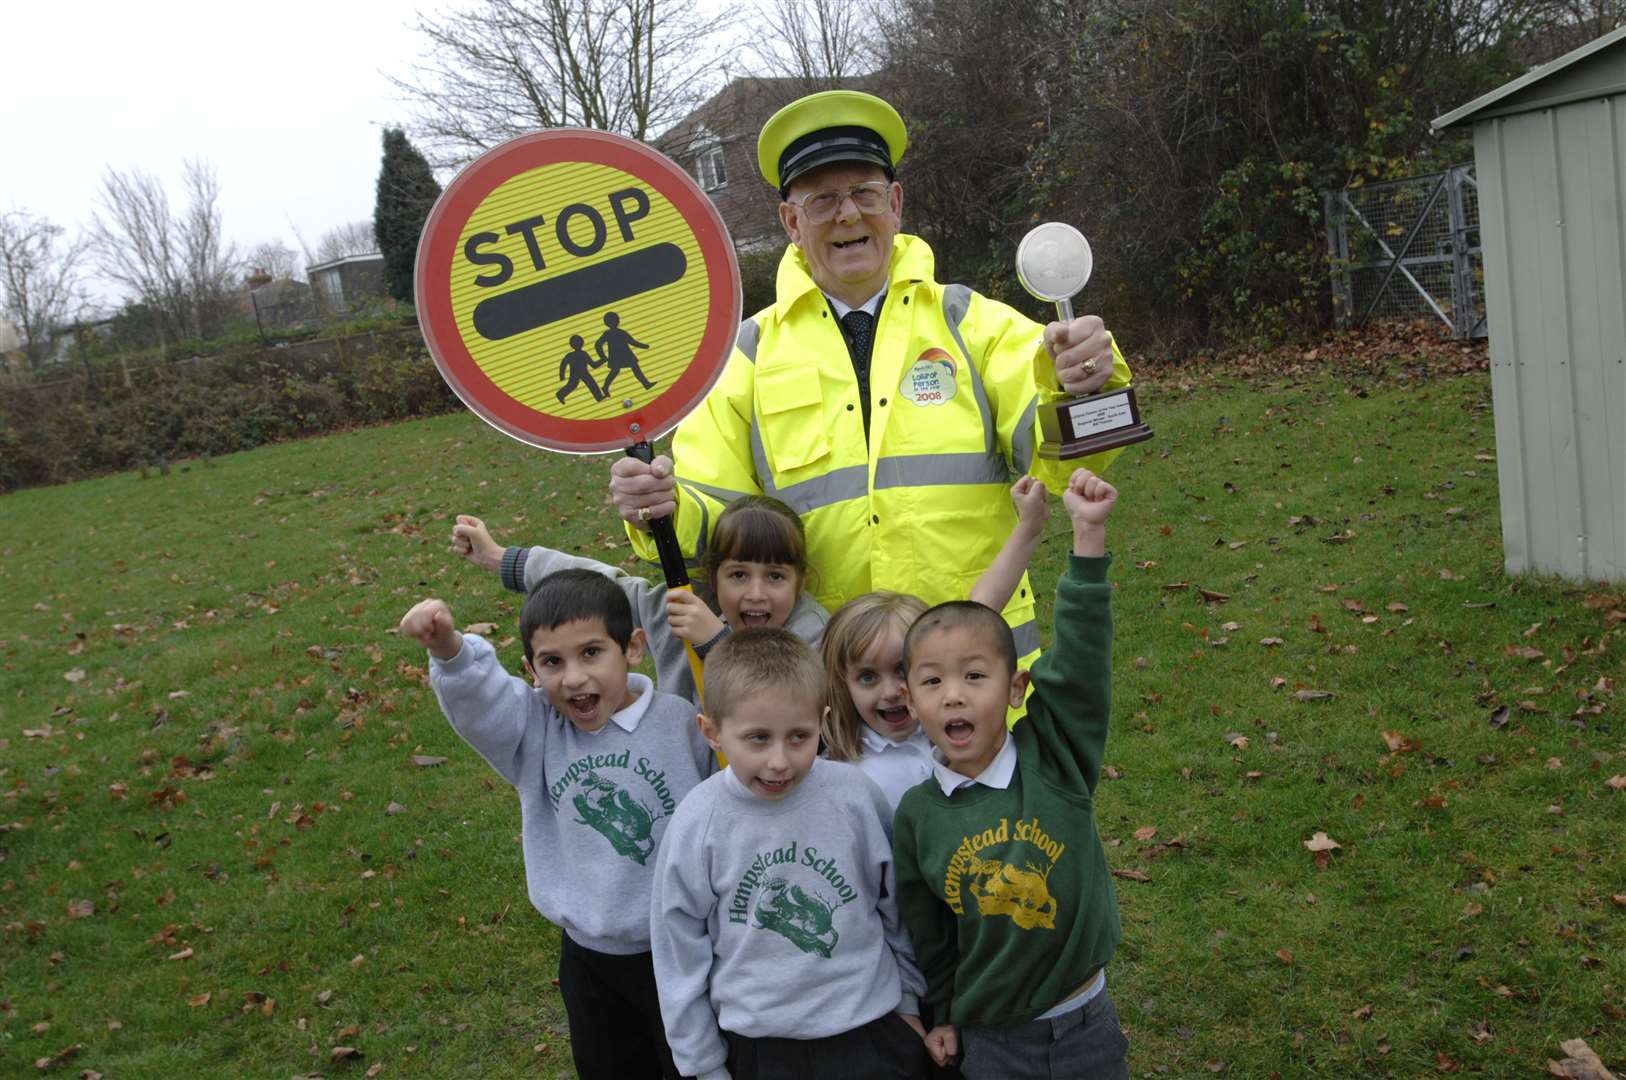 Bill Thomas with kids after being named lollipop person of the year in 2008